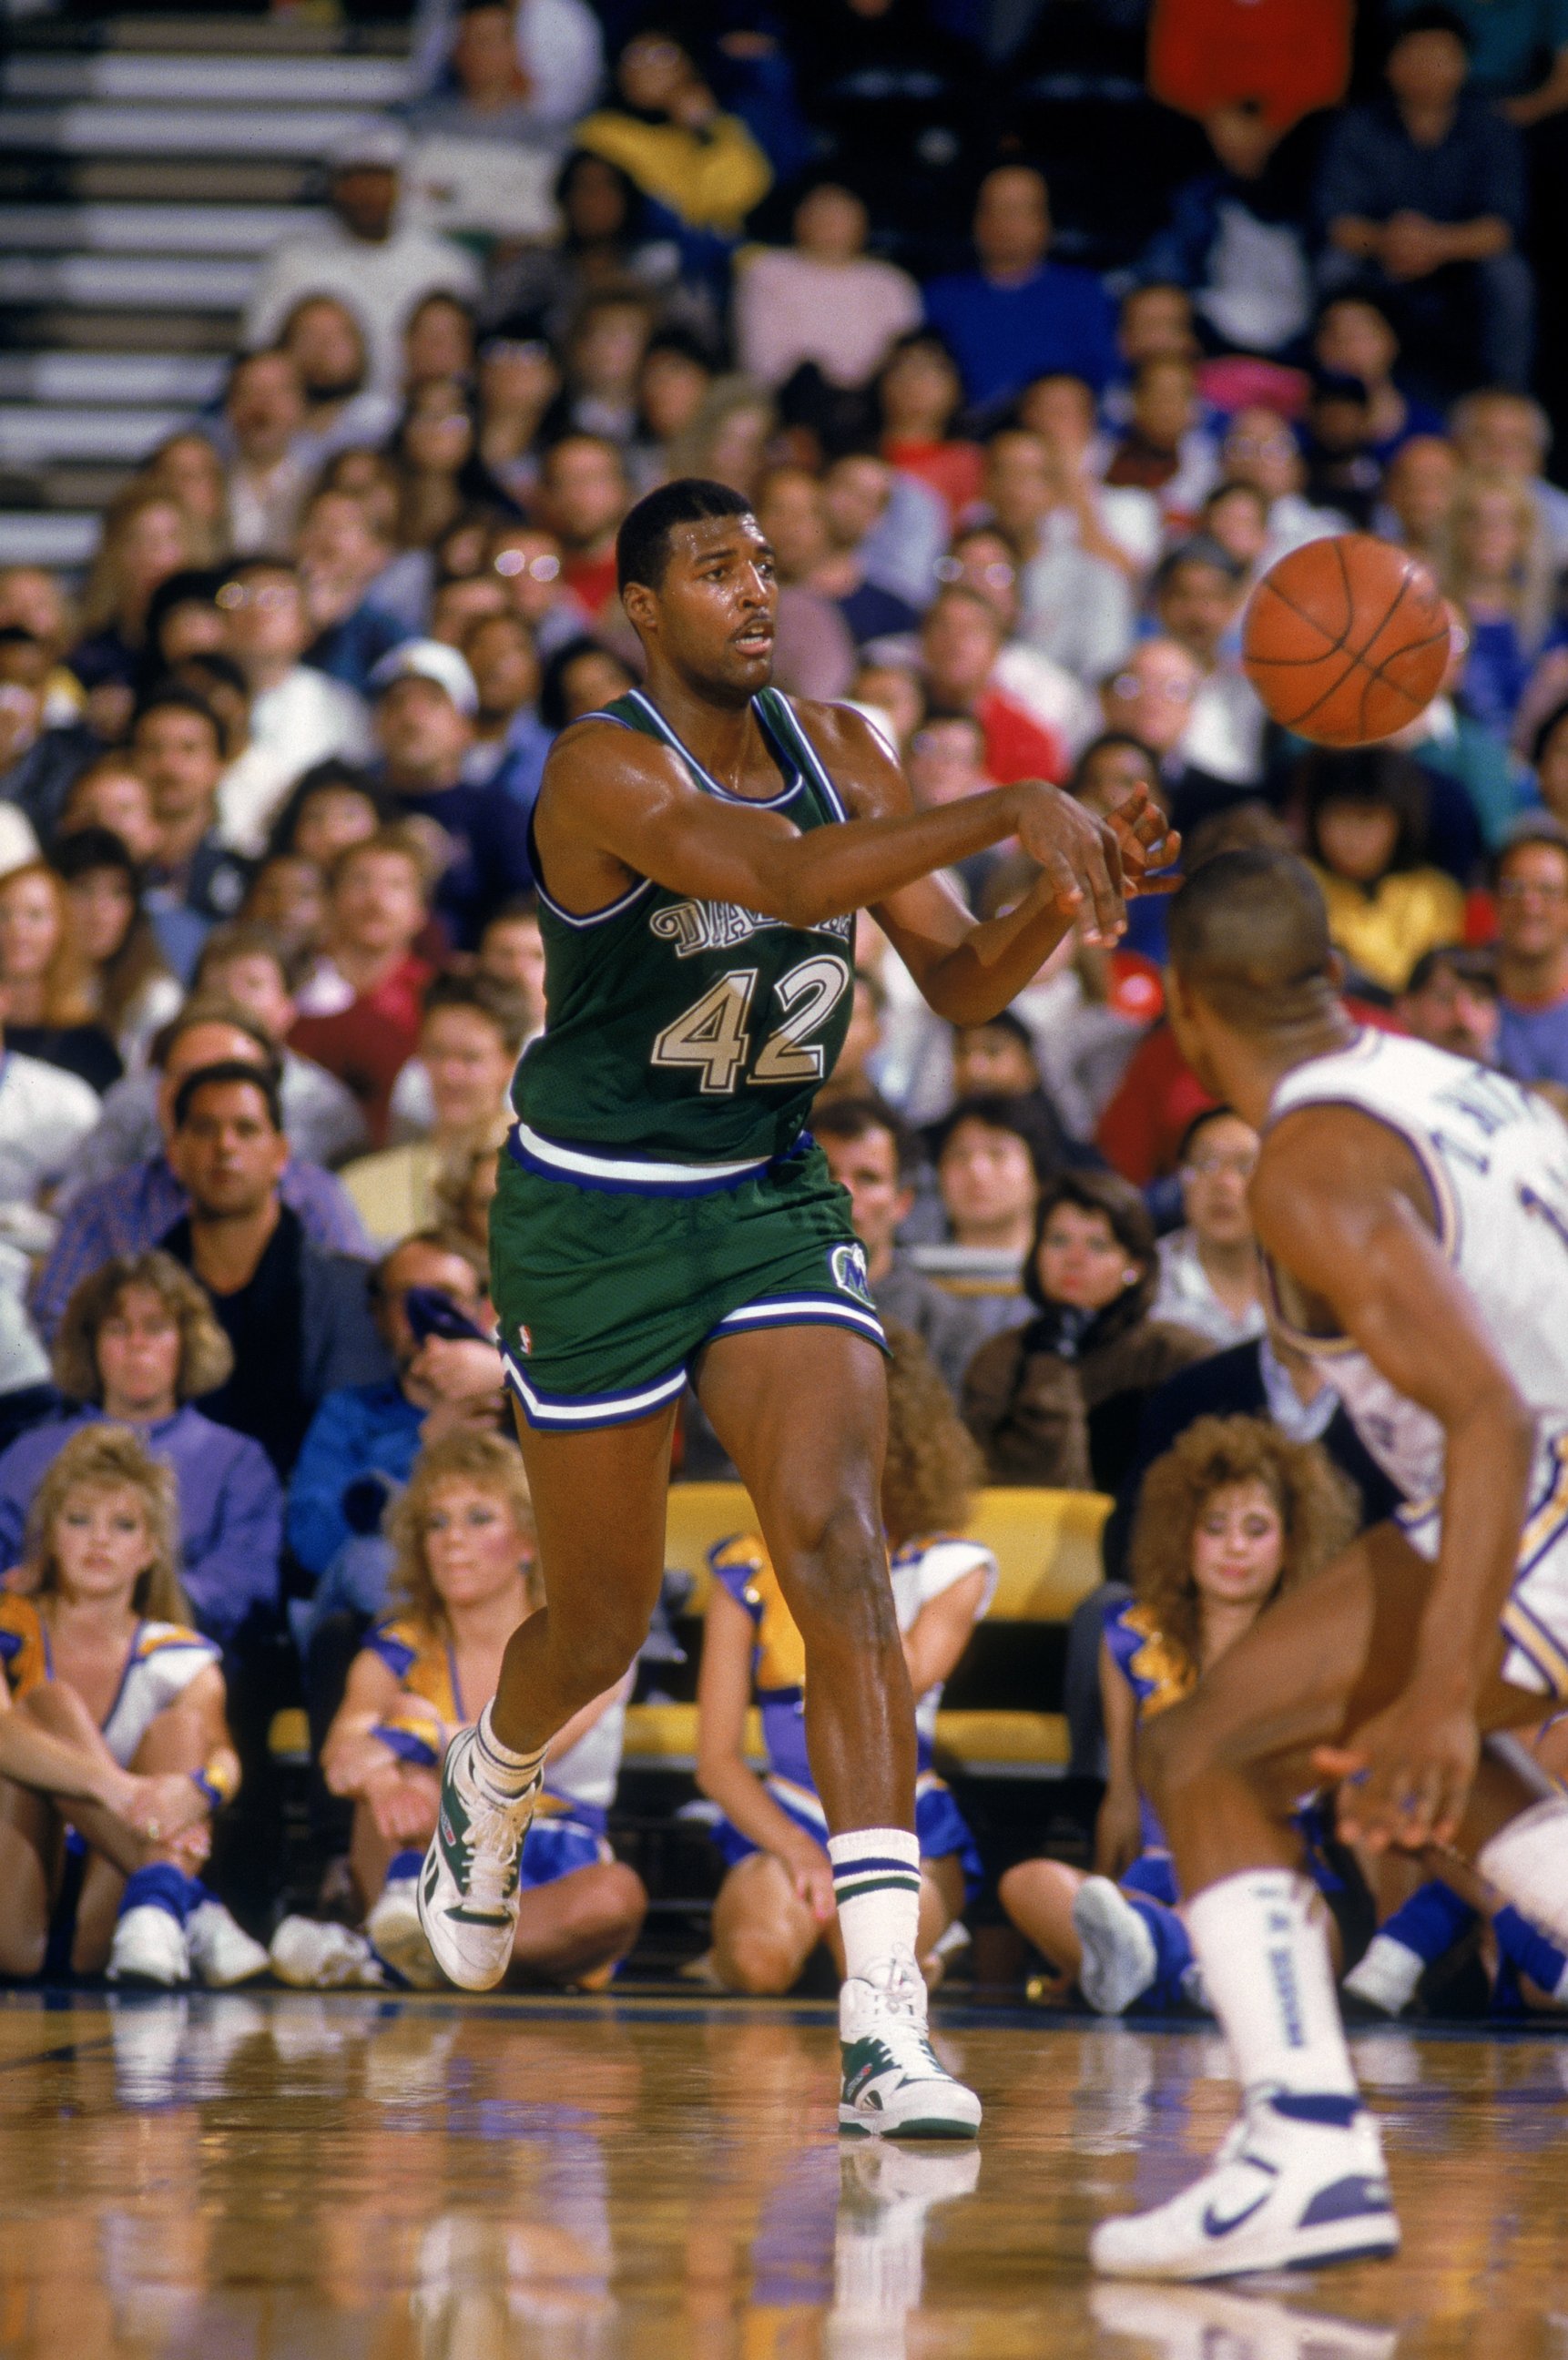 PHOTO: Roy Tarpley #42 of the Dallas Mavericks passes the ball during the NBA game against the Golden State Warriors at the Oakland/Alameda County Coliseum Arena in Oakland, Calif. in 1988. 